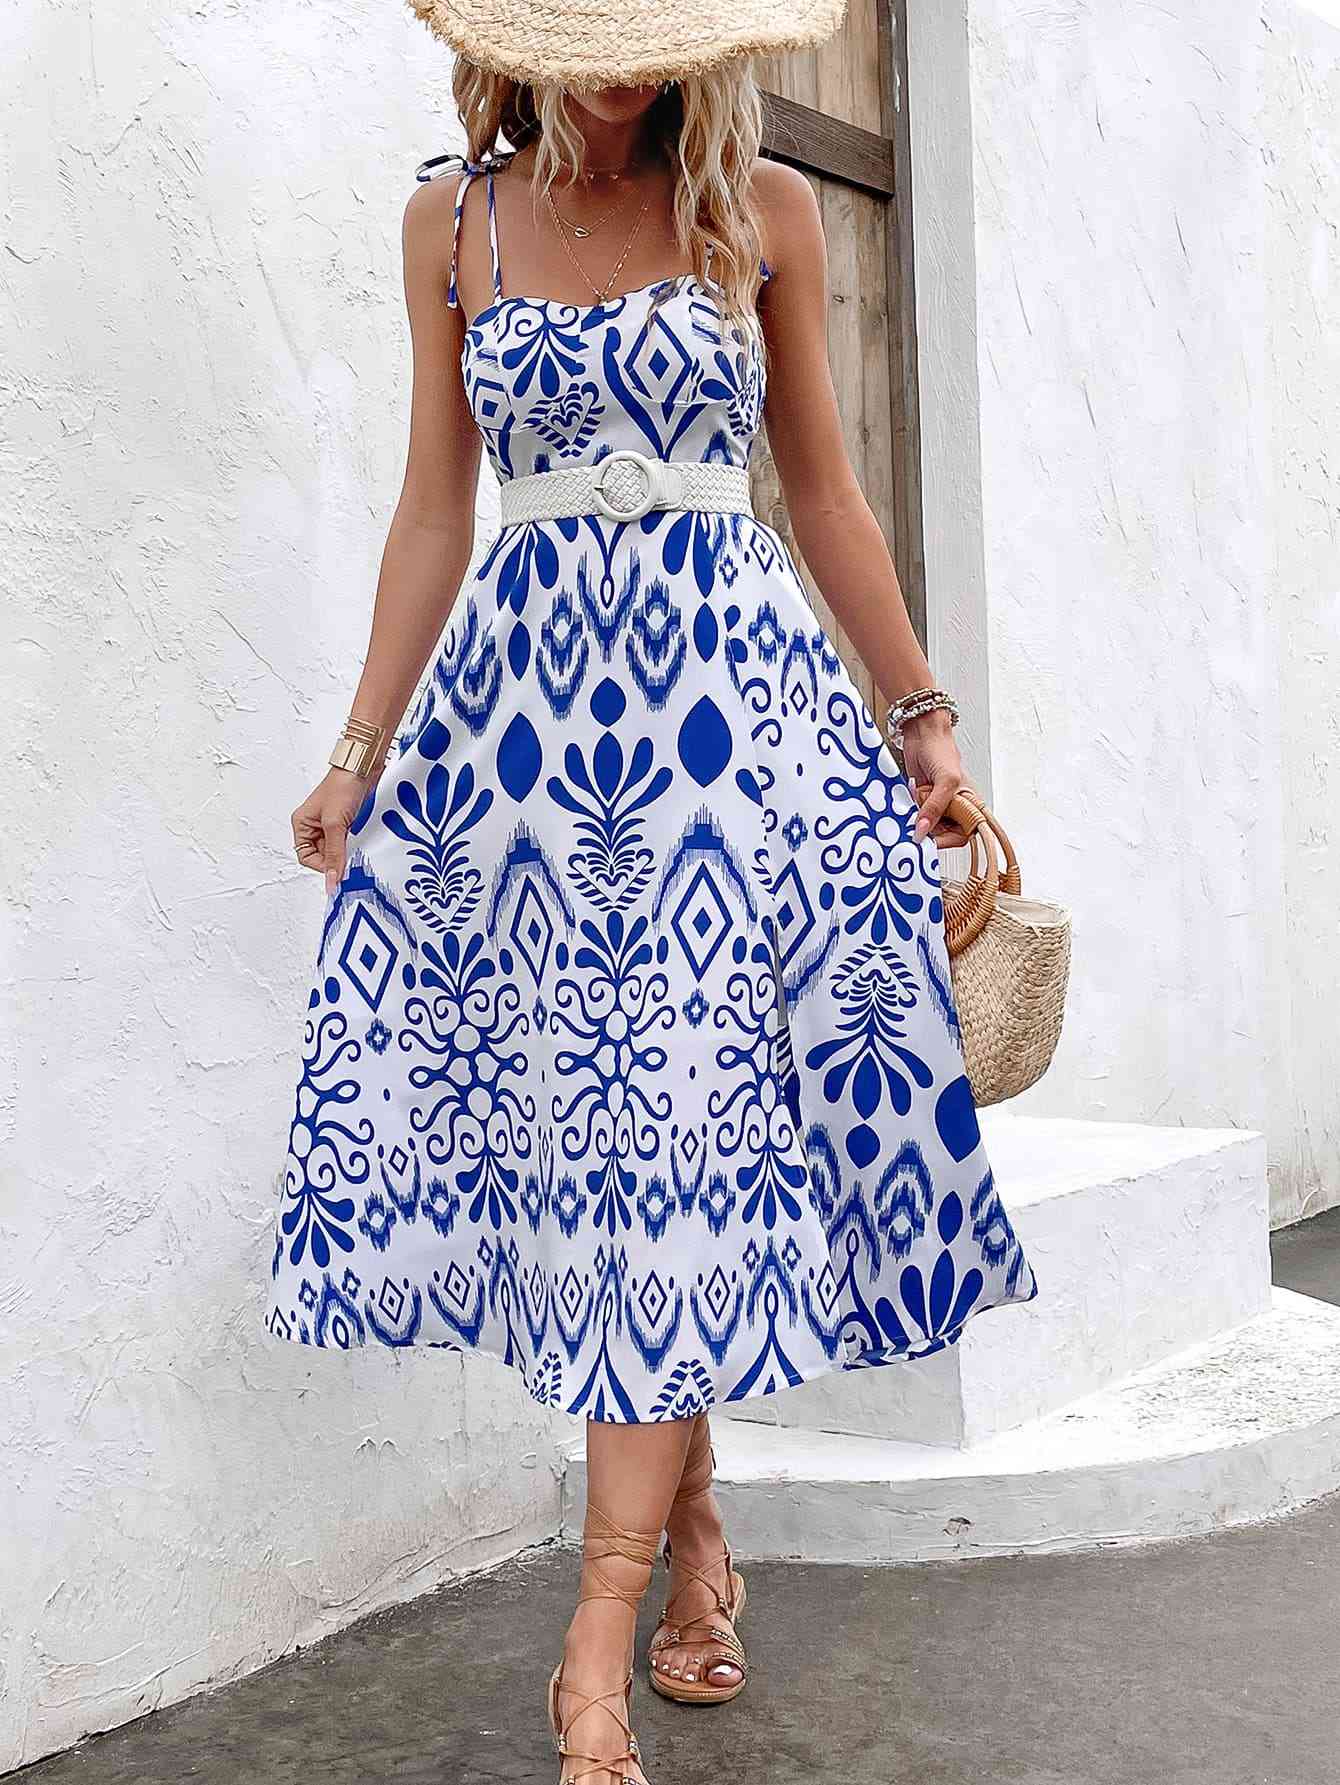 BUE spring and summer maxi dress